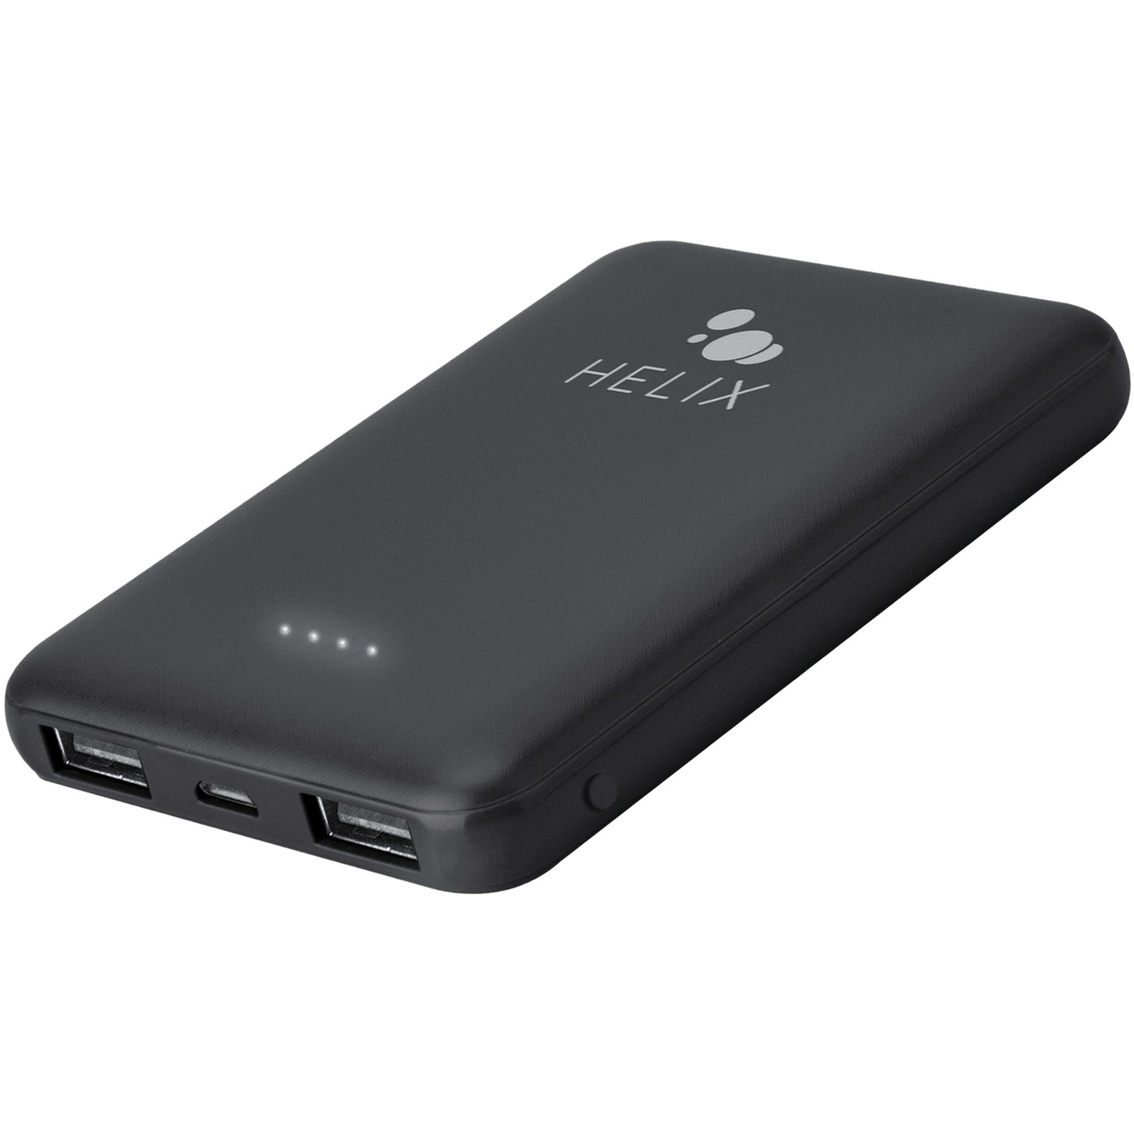 Helix 5,000 mAh Power Bank With Dual USB-A Ports - Image 2 of 3